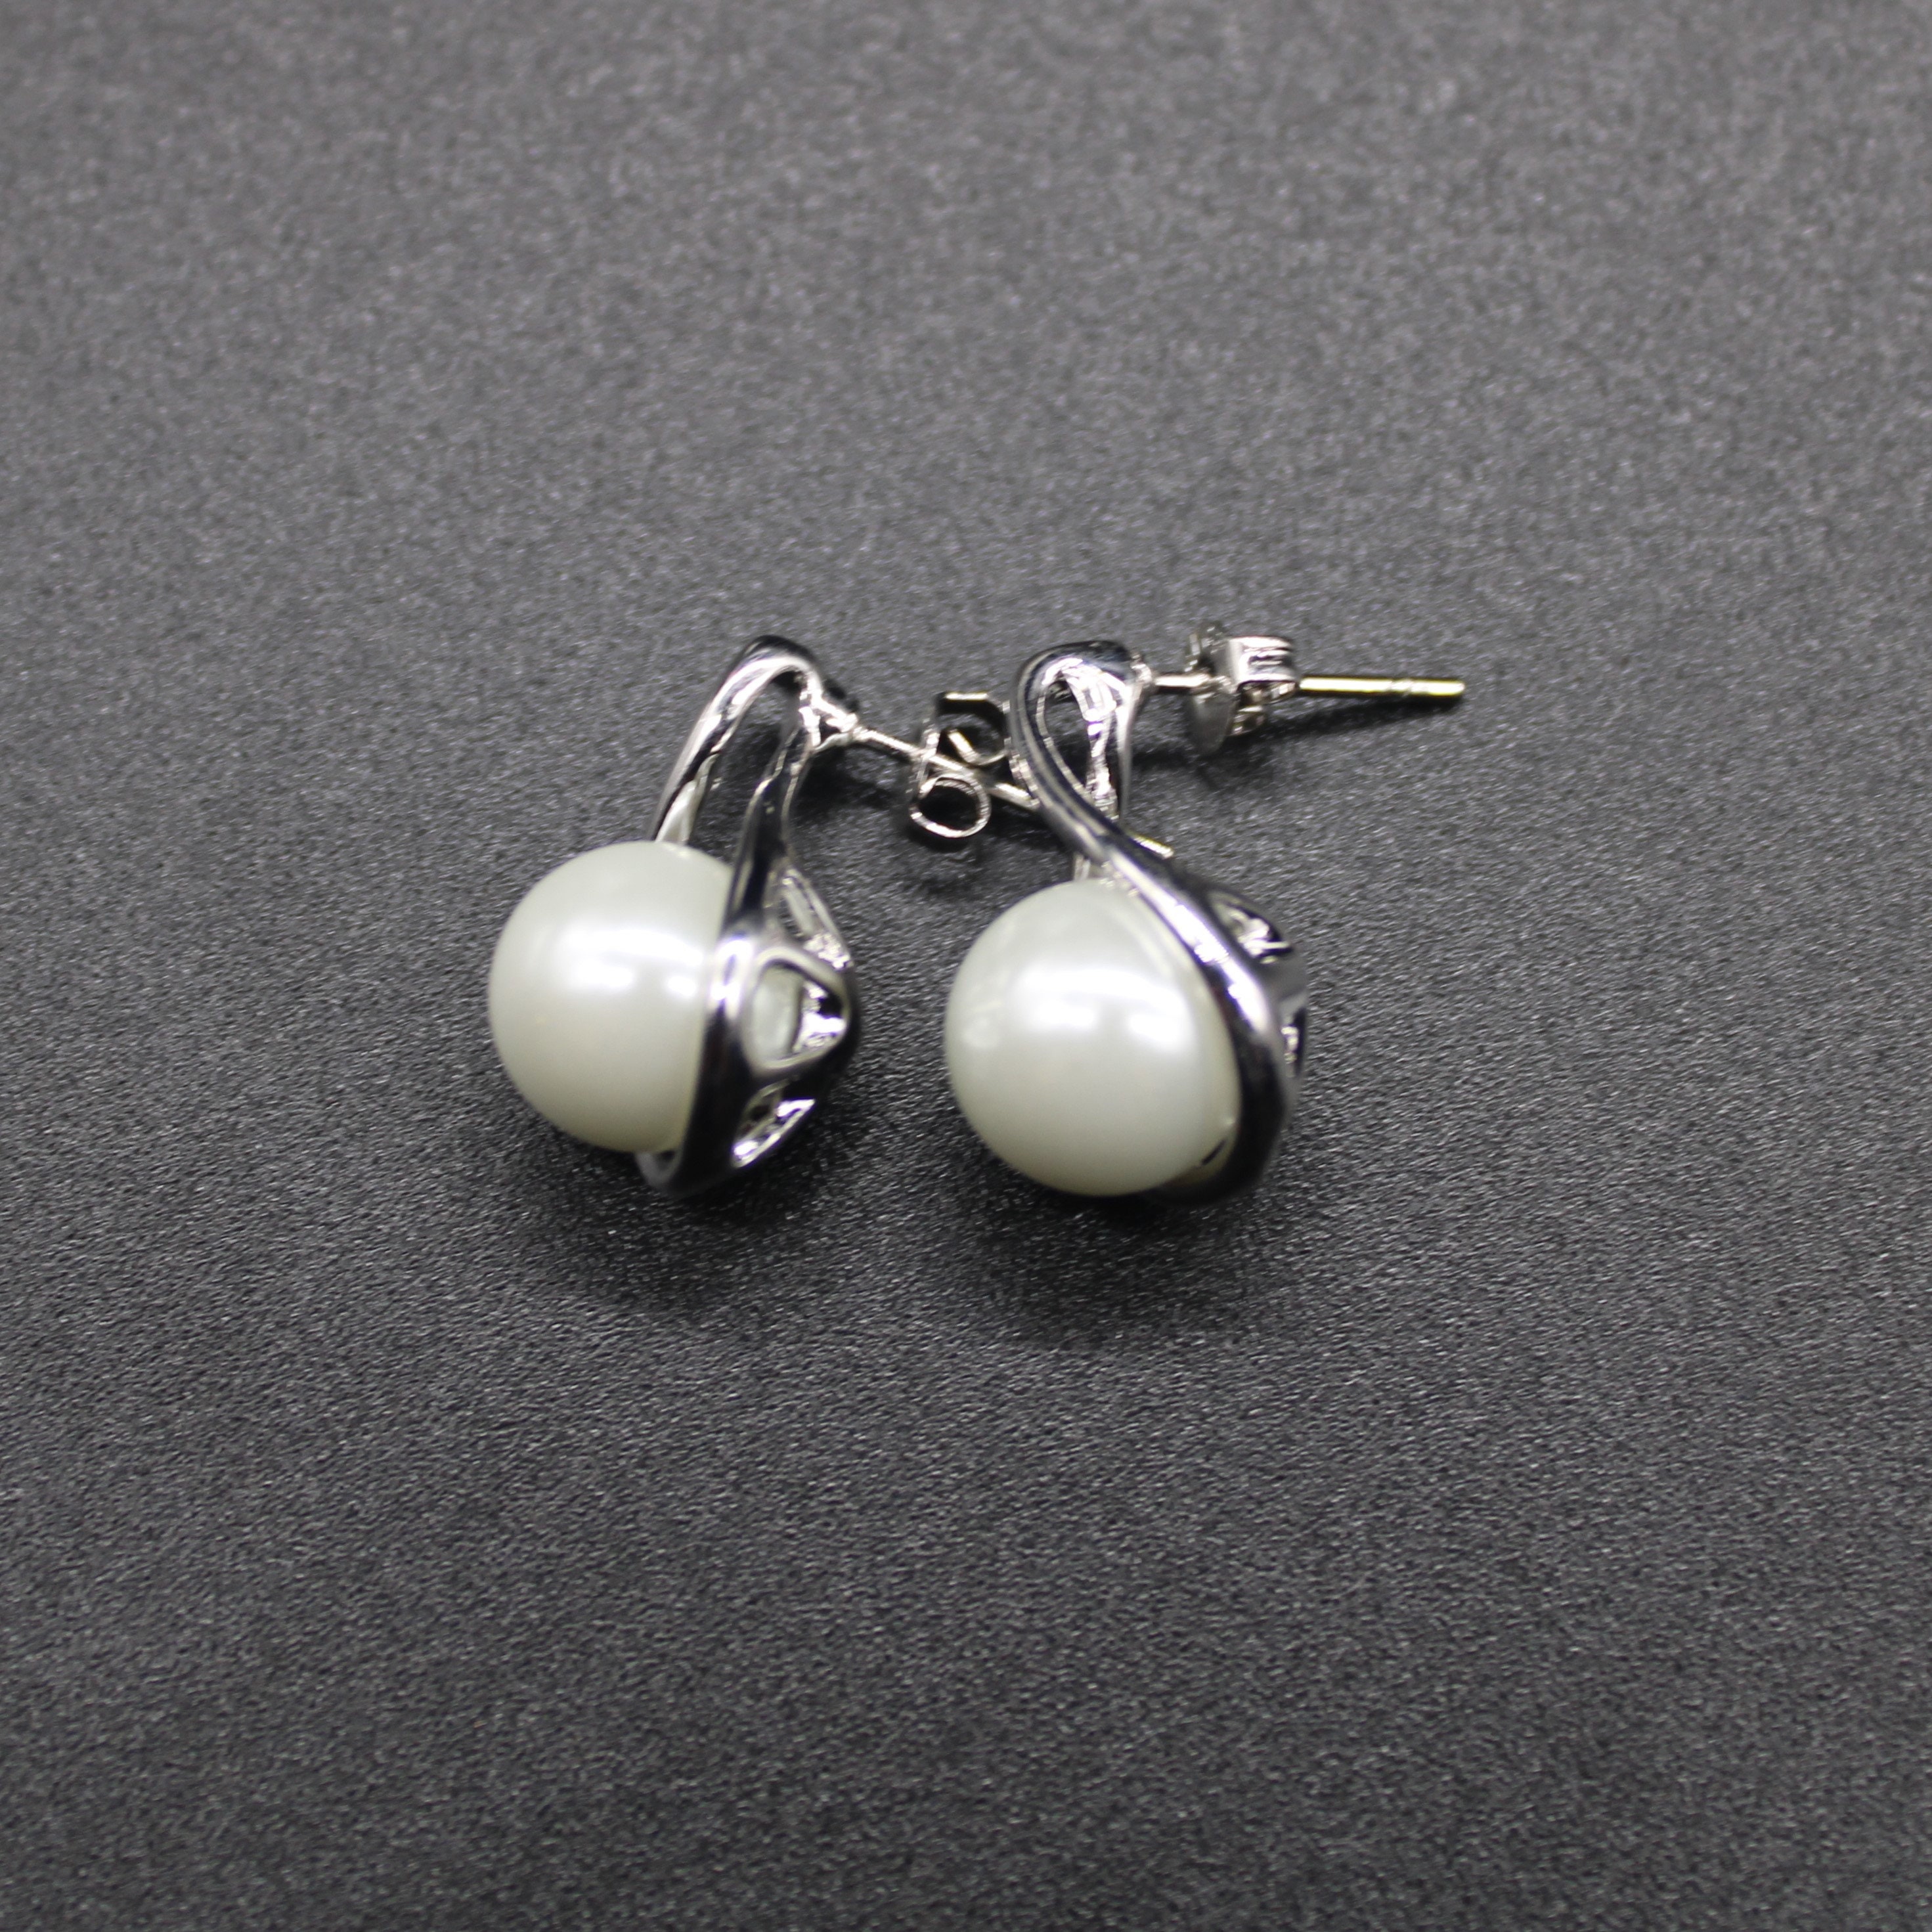 White Pearl and Silver Teardrop Shaped Earrings - Etsy